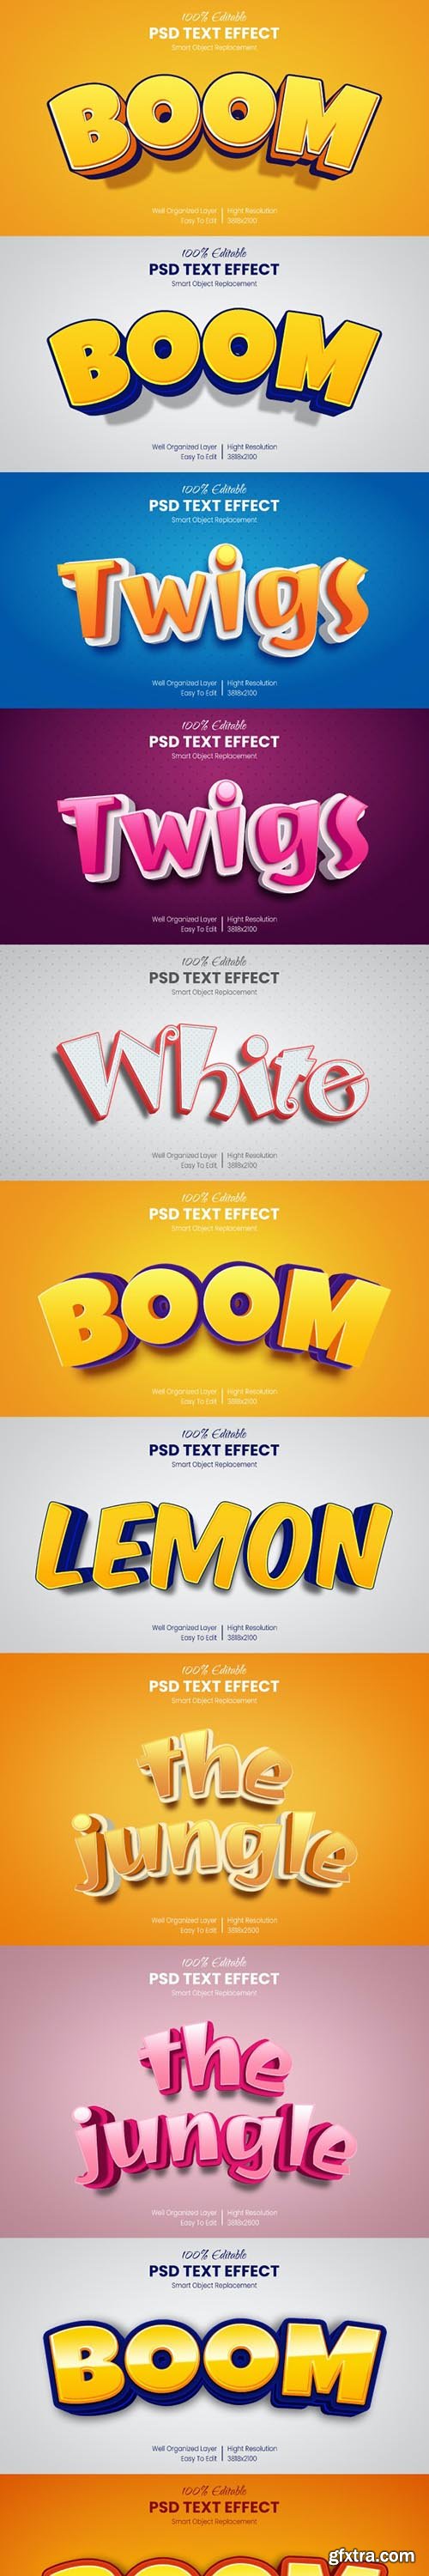 GraphicRiver - GraphicRiver - 18 Cartoon Photoshop Text Effects - Comic Styles 28704785